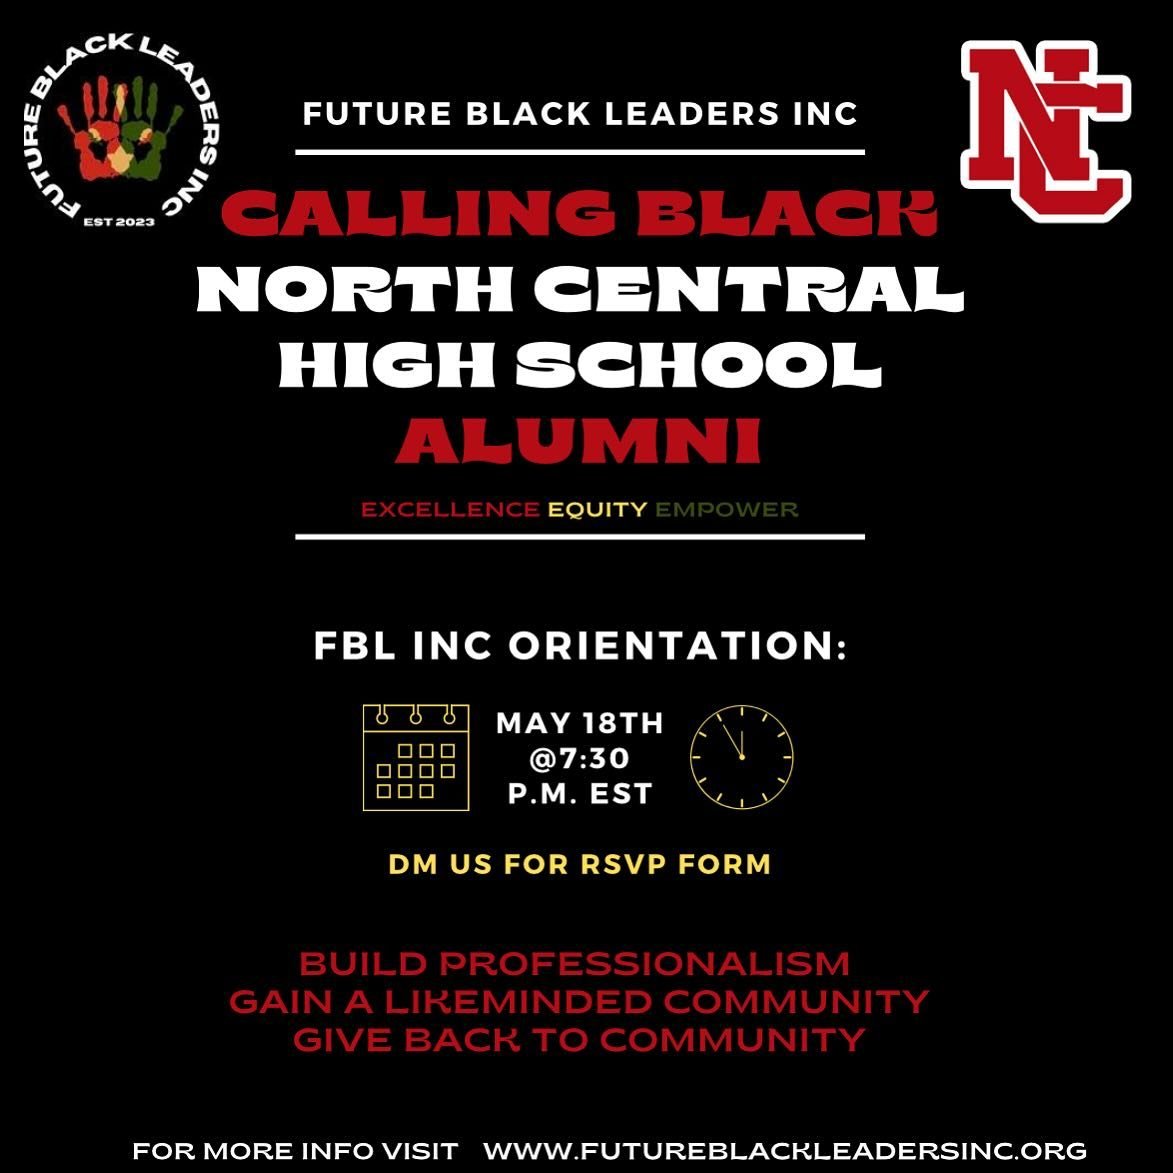 We&rsquo;re recruiting Alumni!! If you have attended North Central High school, was involved in North central Black Student Union, The Black Leadership Summit, or you&rsquo;re wanting to get involved with FBL for the first time we&rsquo;re looking fo